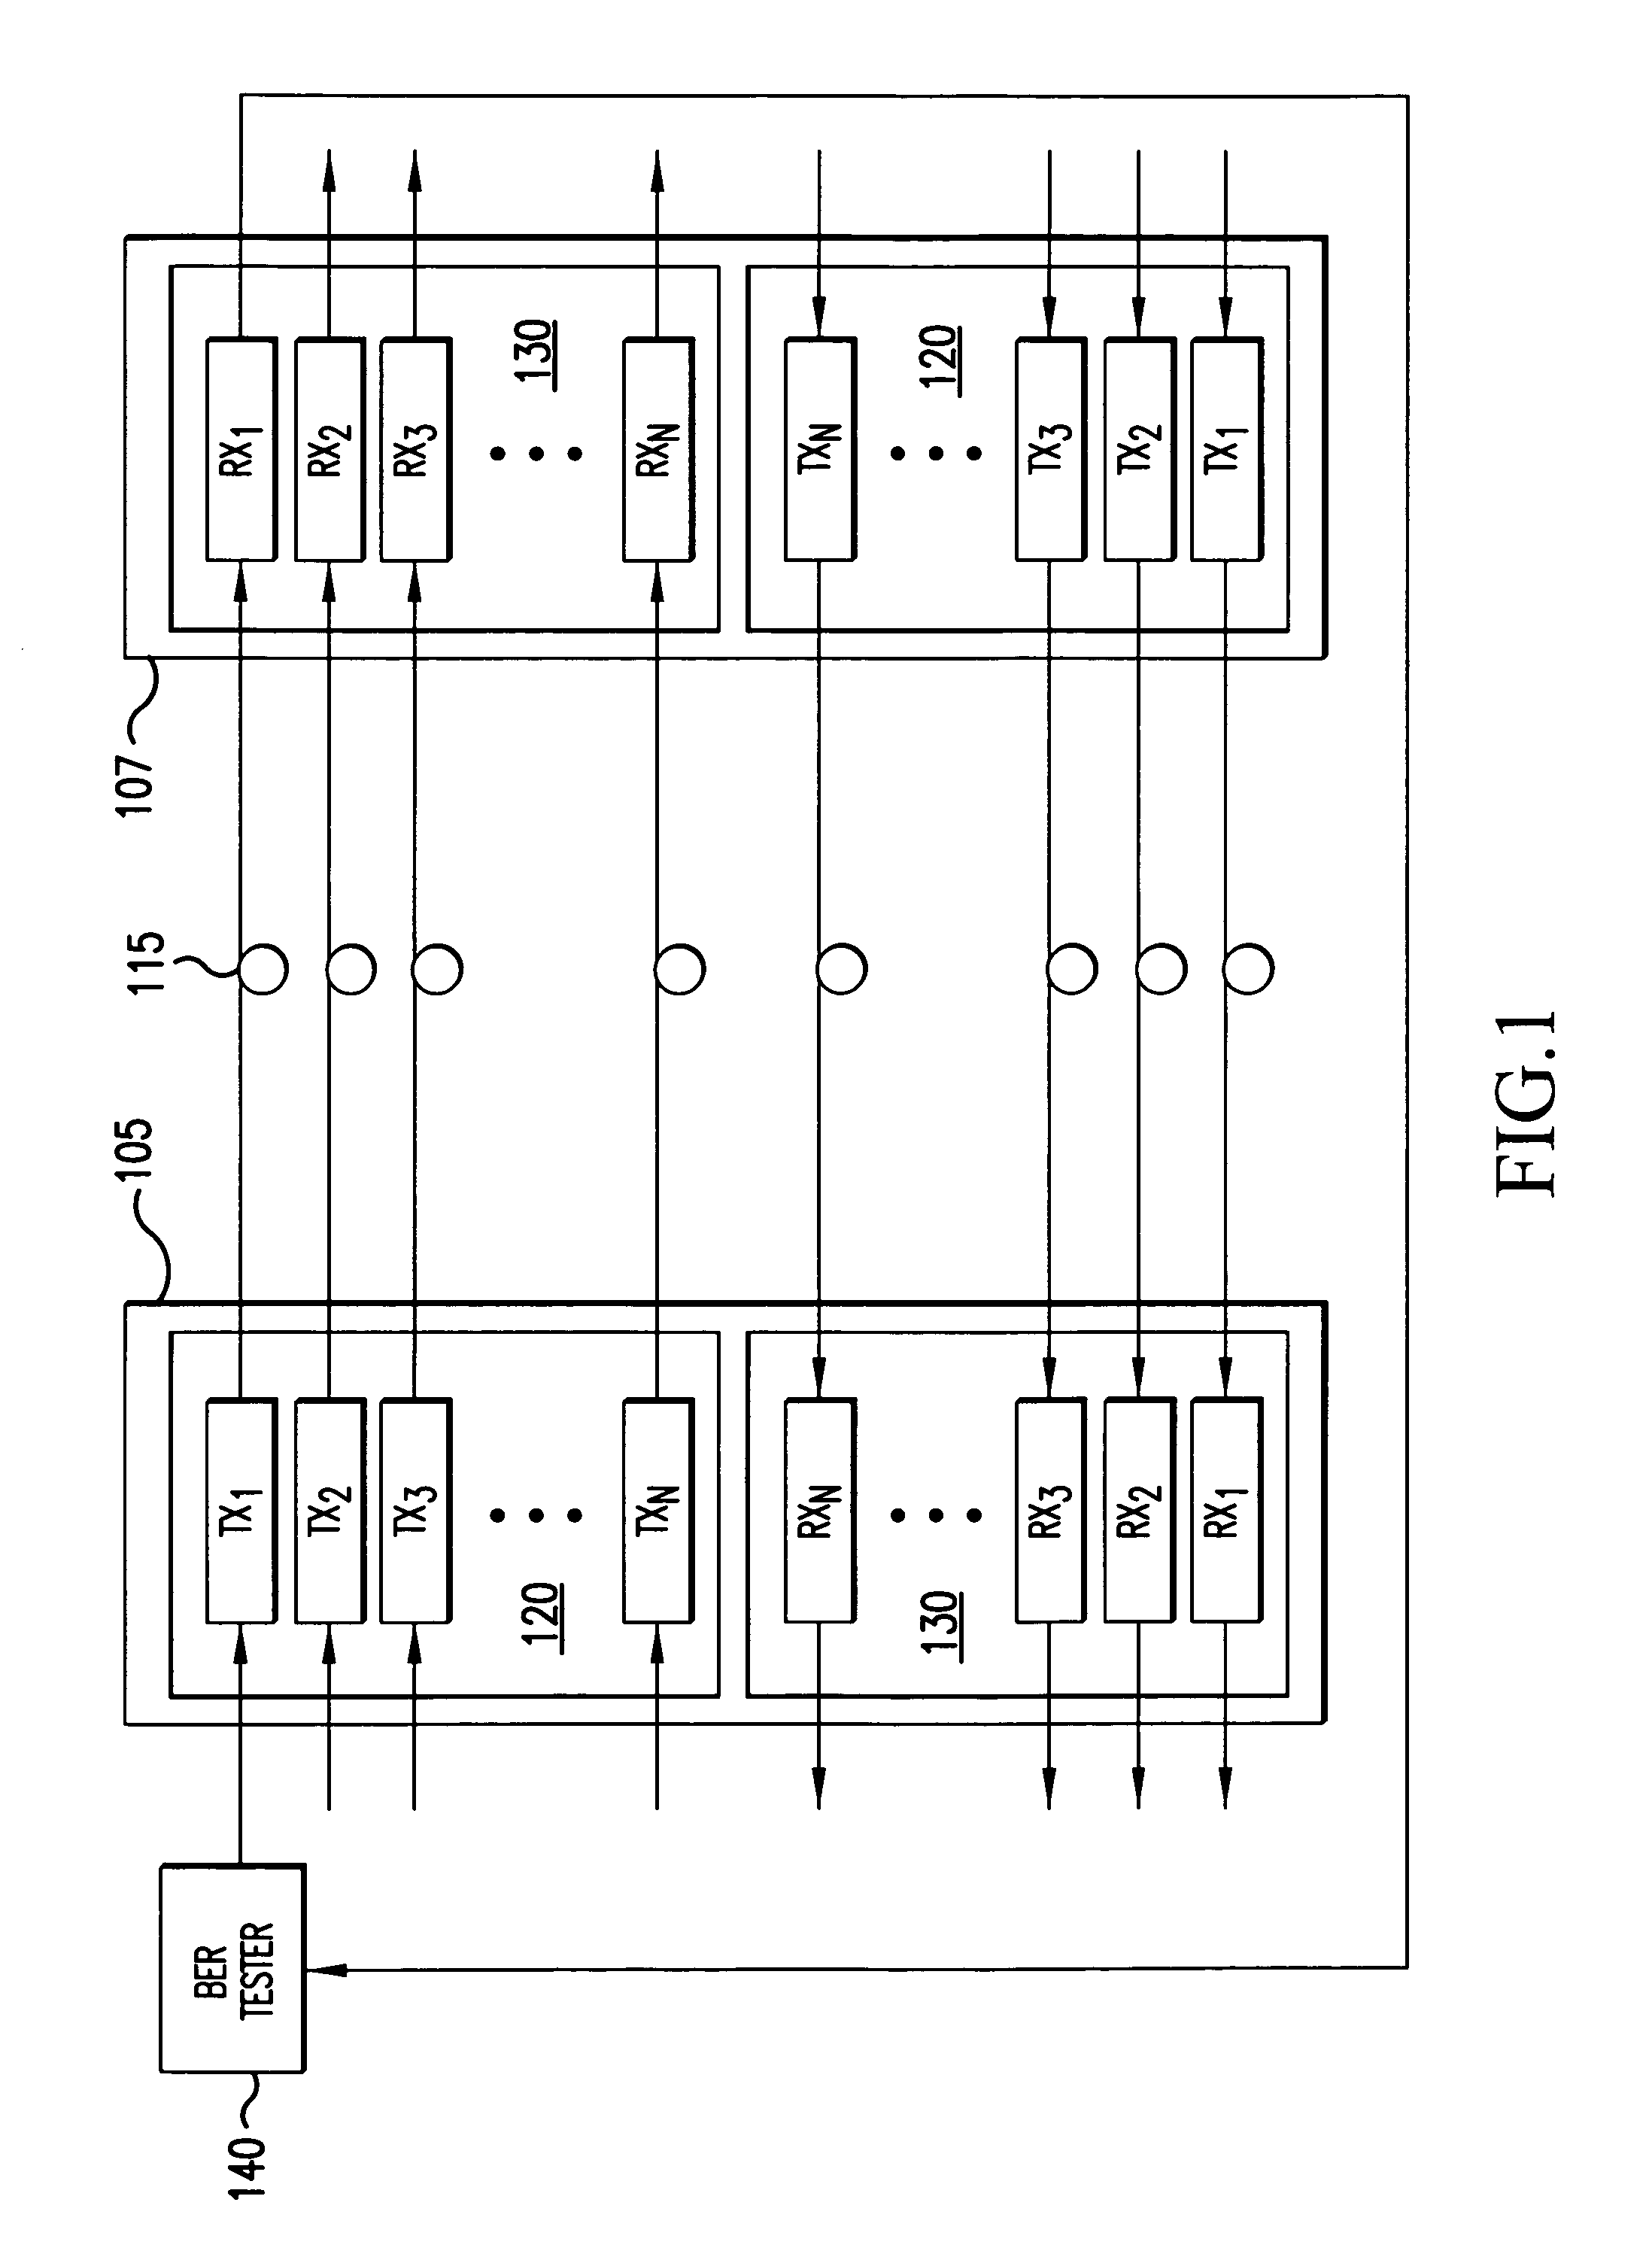 Method of testing bit error rates for a wavelength division multiplexed optical communication system